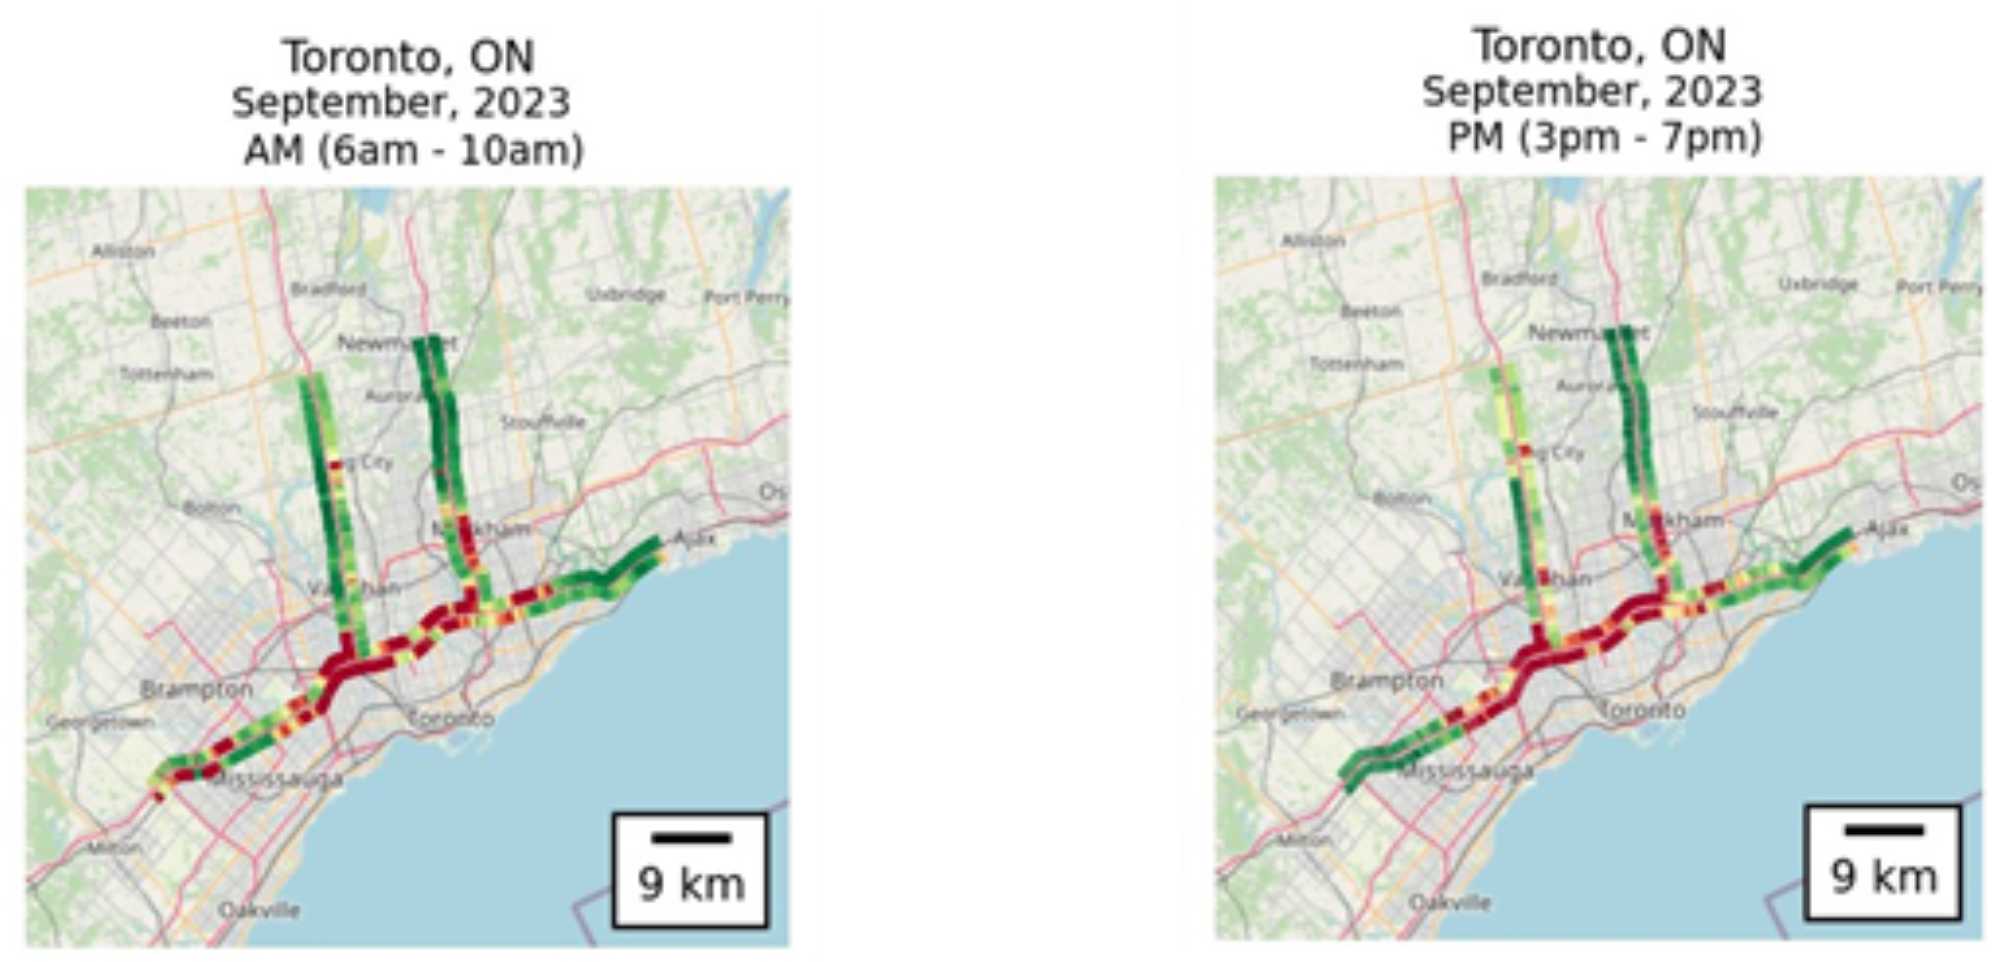 Two maps depicting busy travel corridors in Vancouver. The left image shows data from September 2023, 6AM to 10AM. The right image shows data from September 2023, 3PM to 7PM.